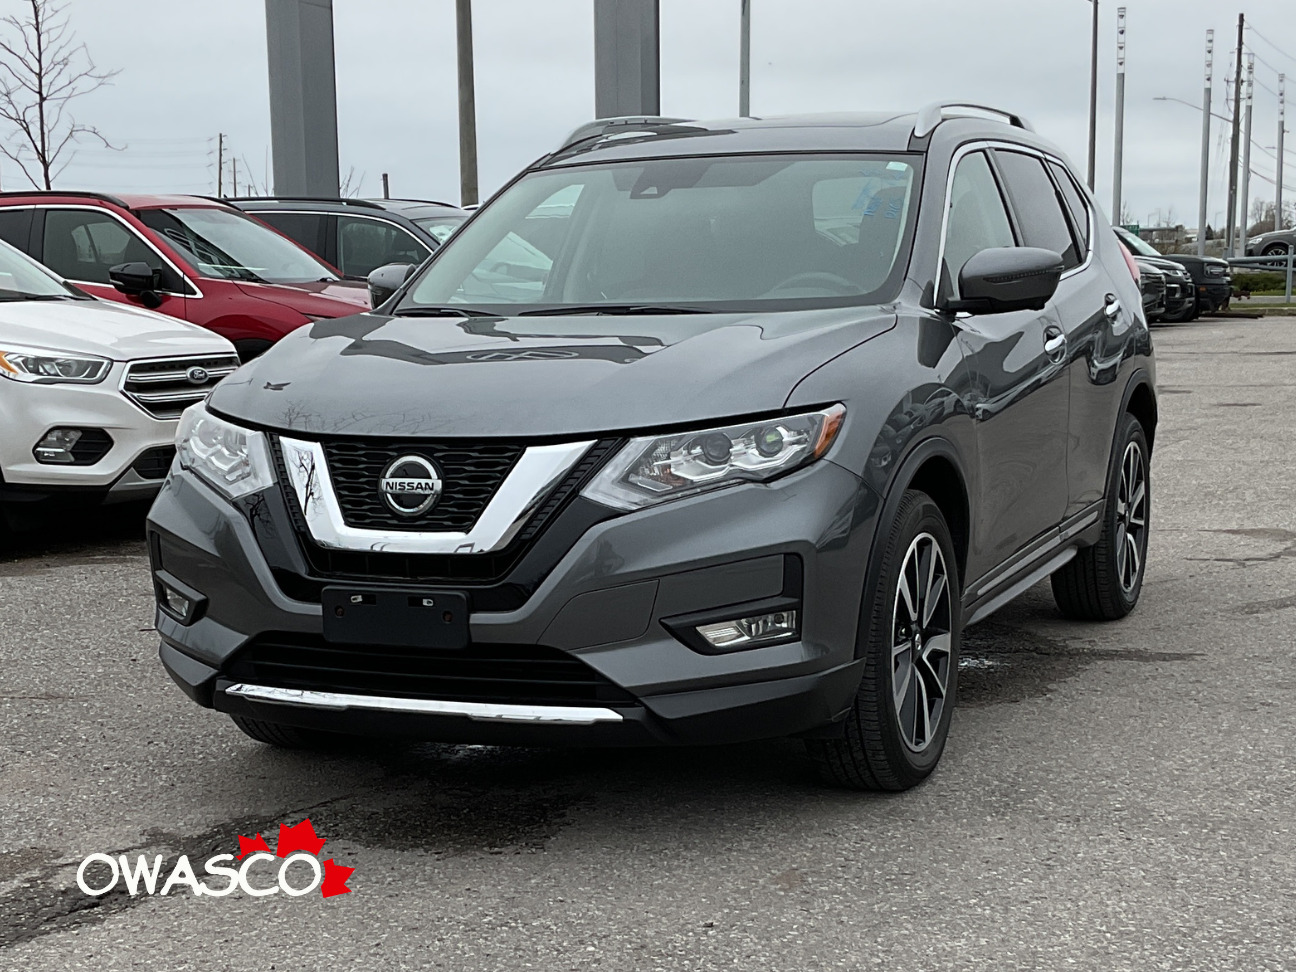 2020 Nissan Rogue 2.5L SL! AWD! Safety Included! Clean CarFax!